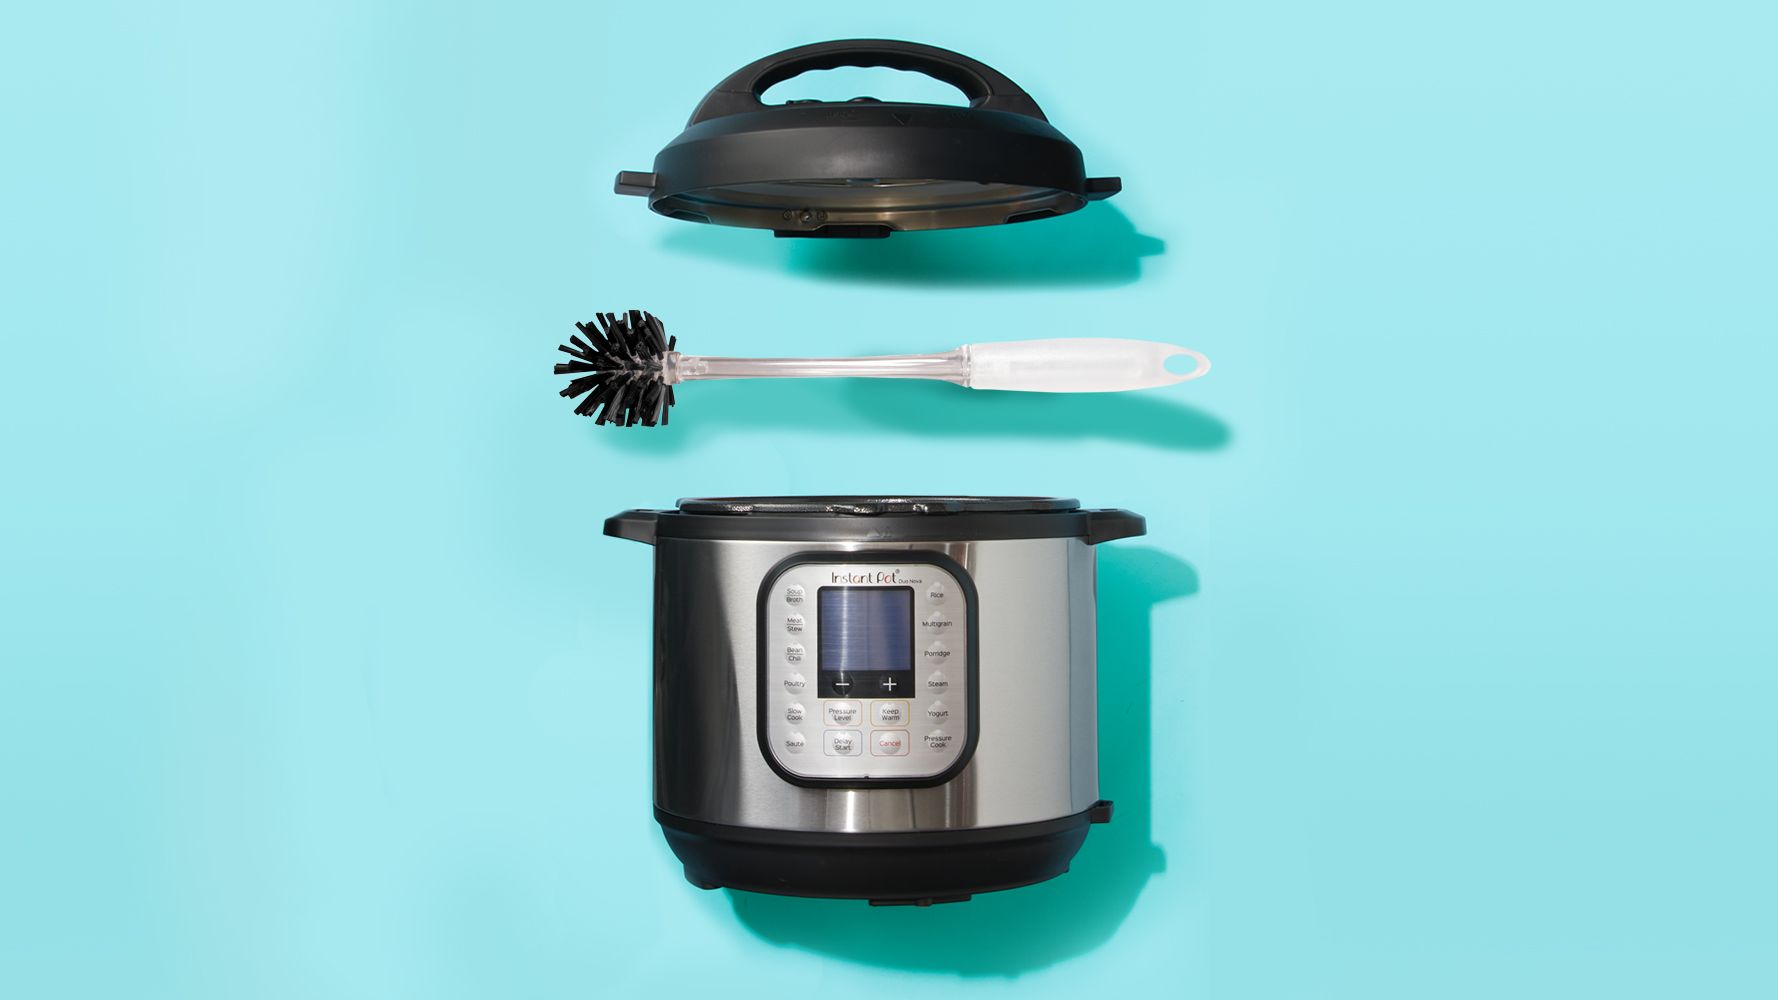 5 Mistakes to Avoid When Using an Electric Pressure Cooker